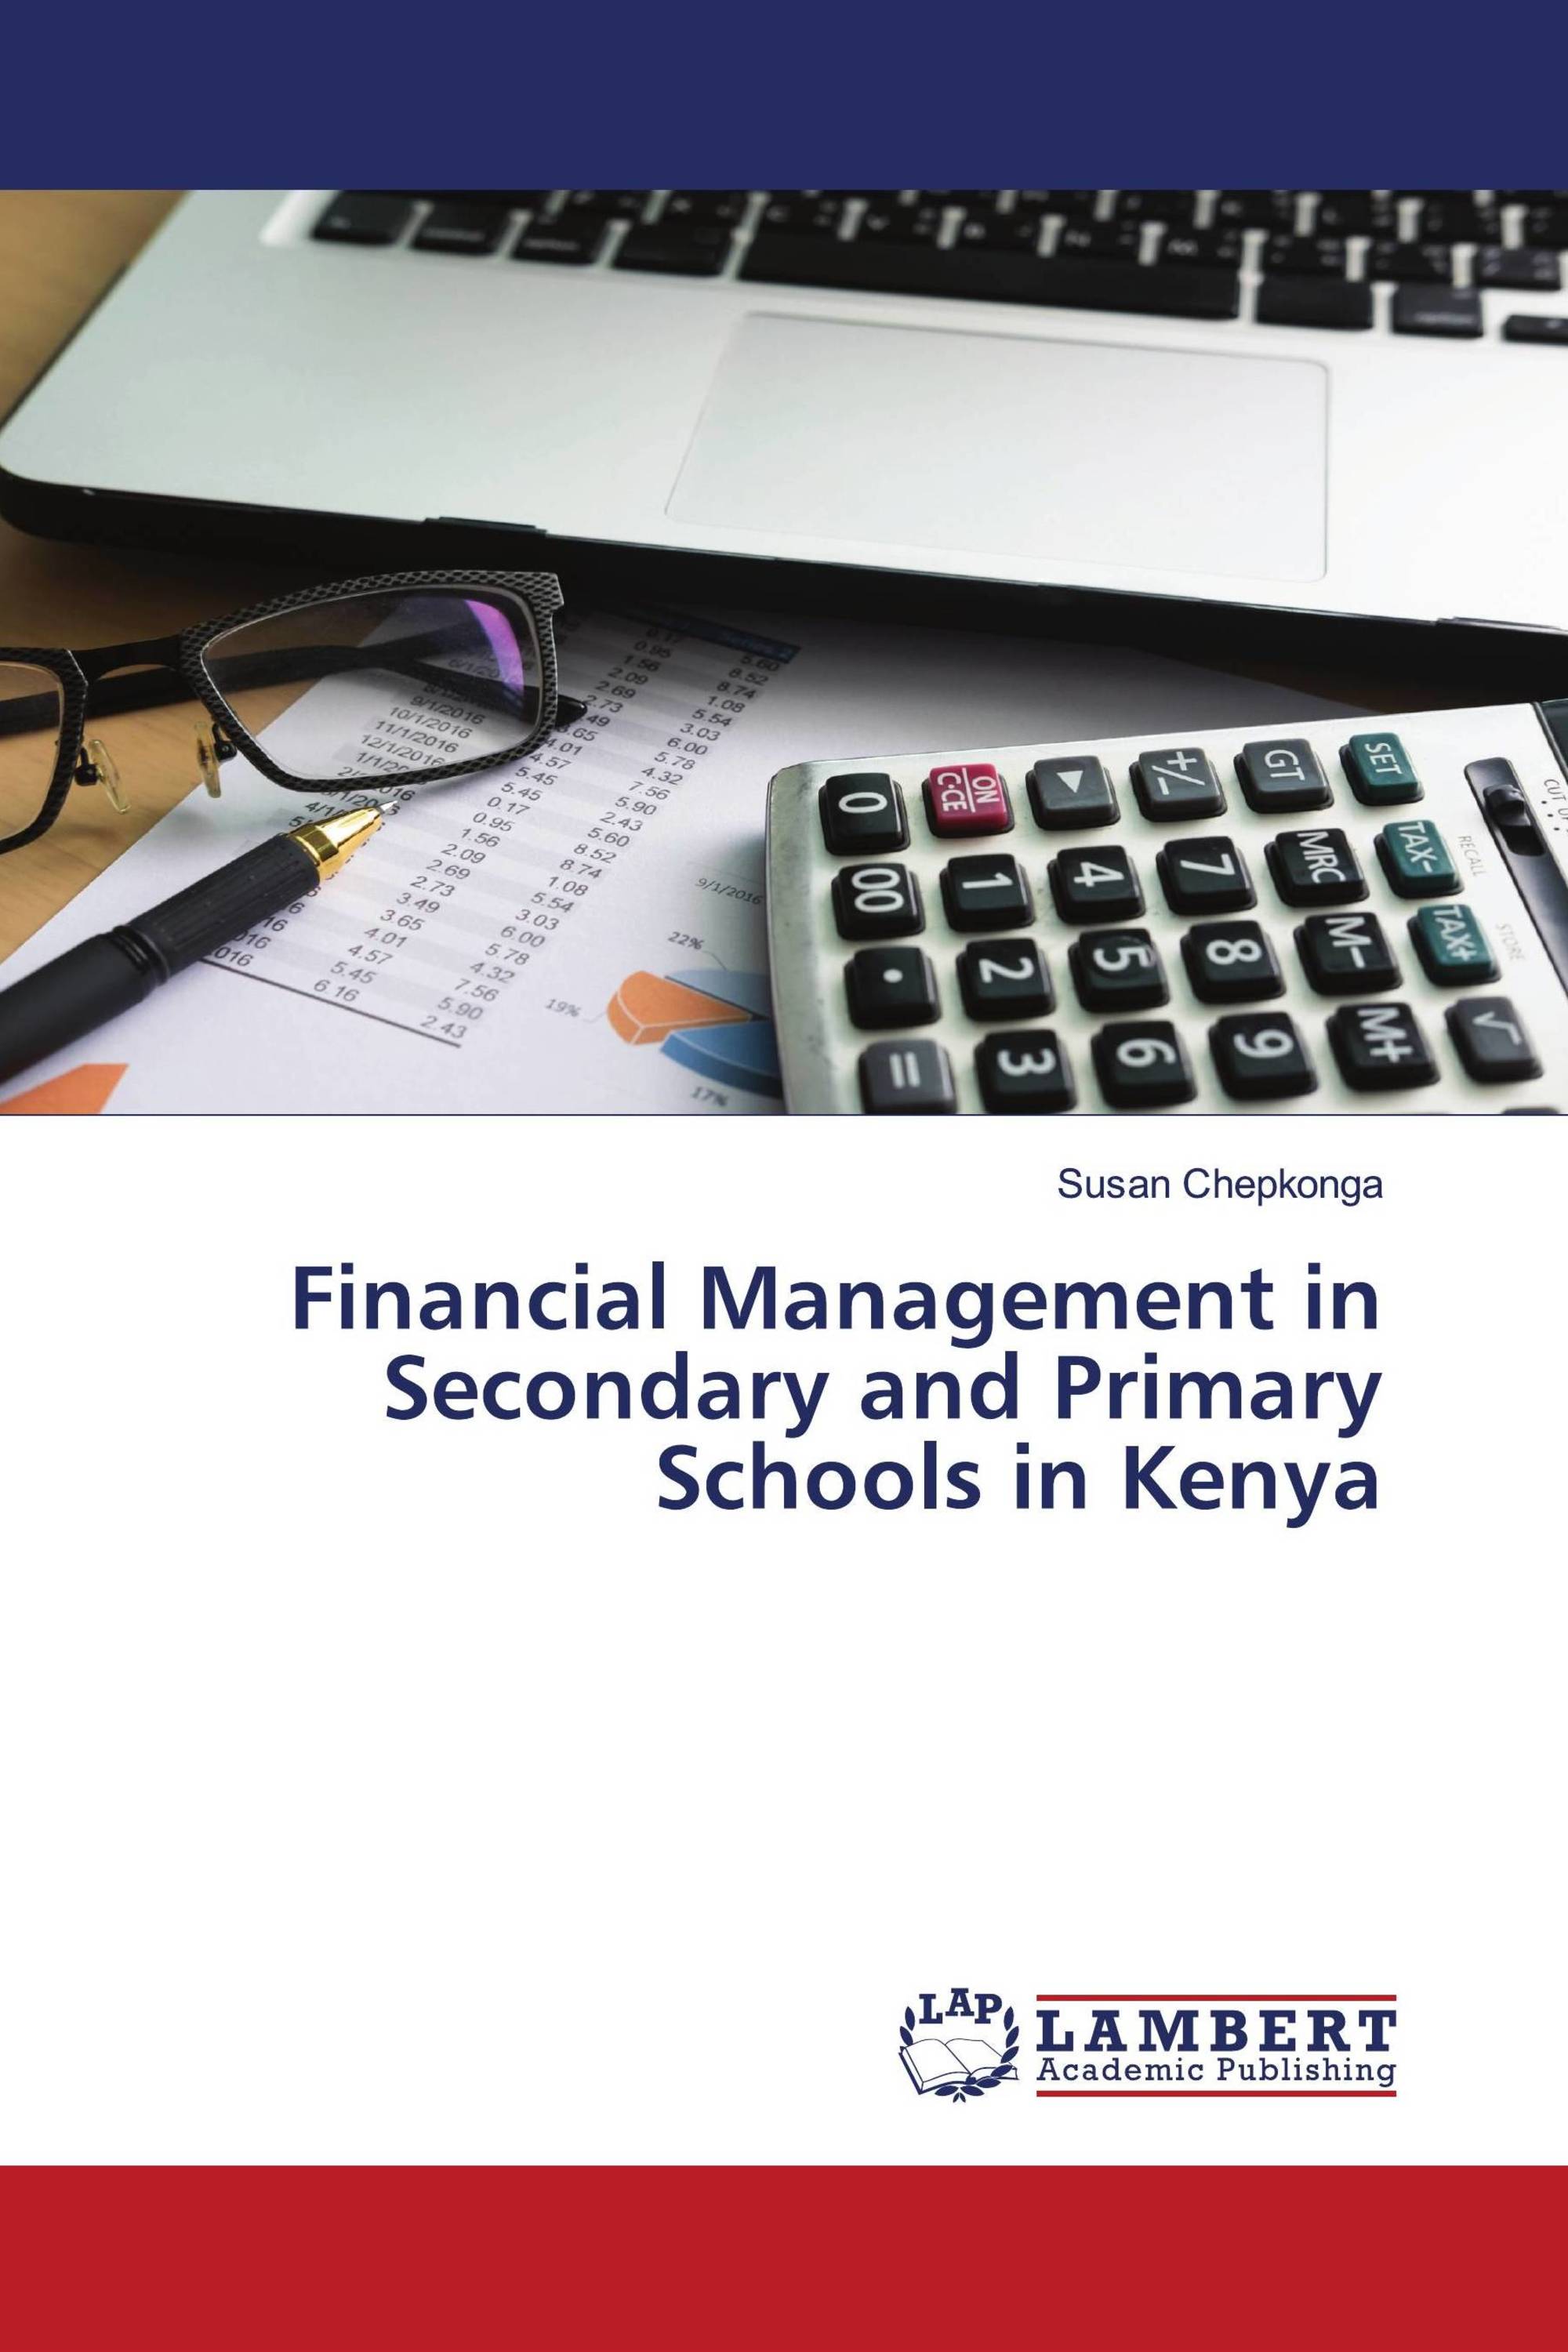 Financial Management in Secondary and Primary Schools in Kenya